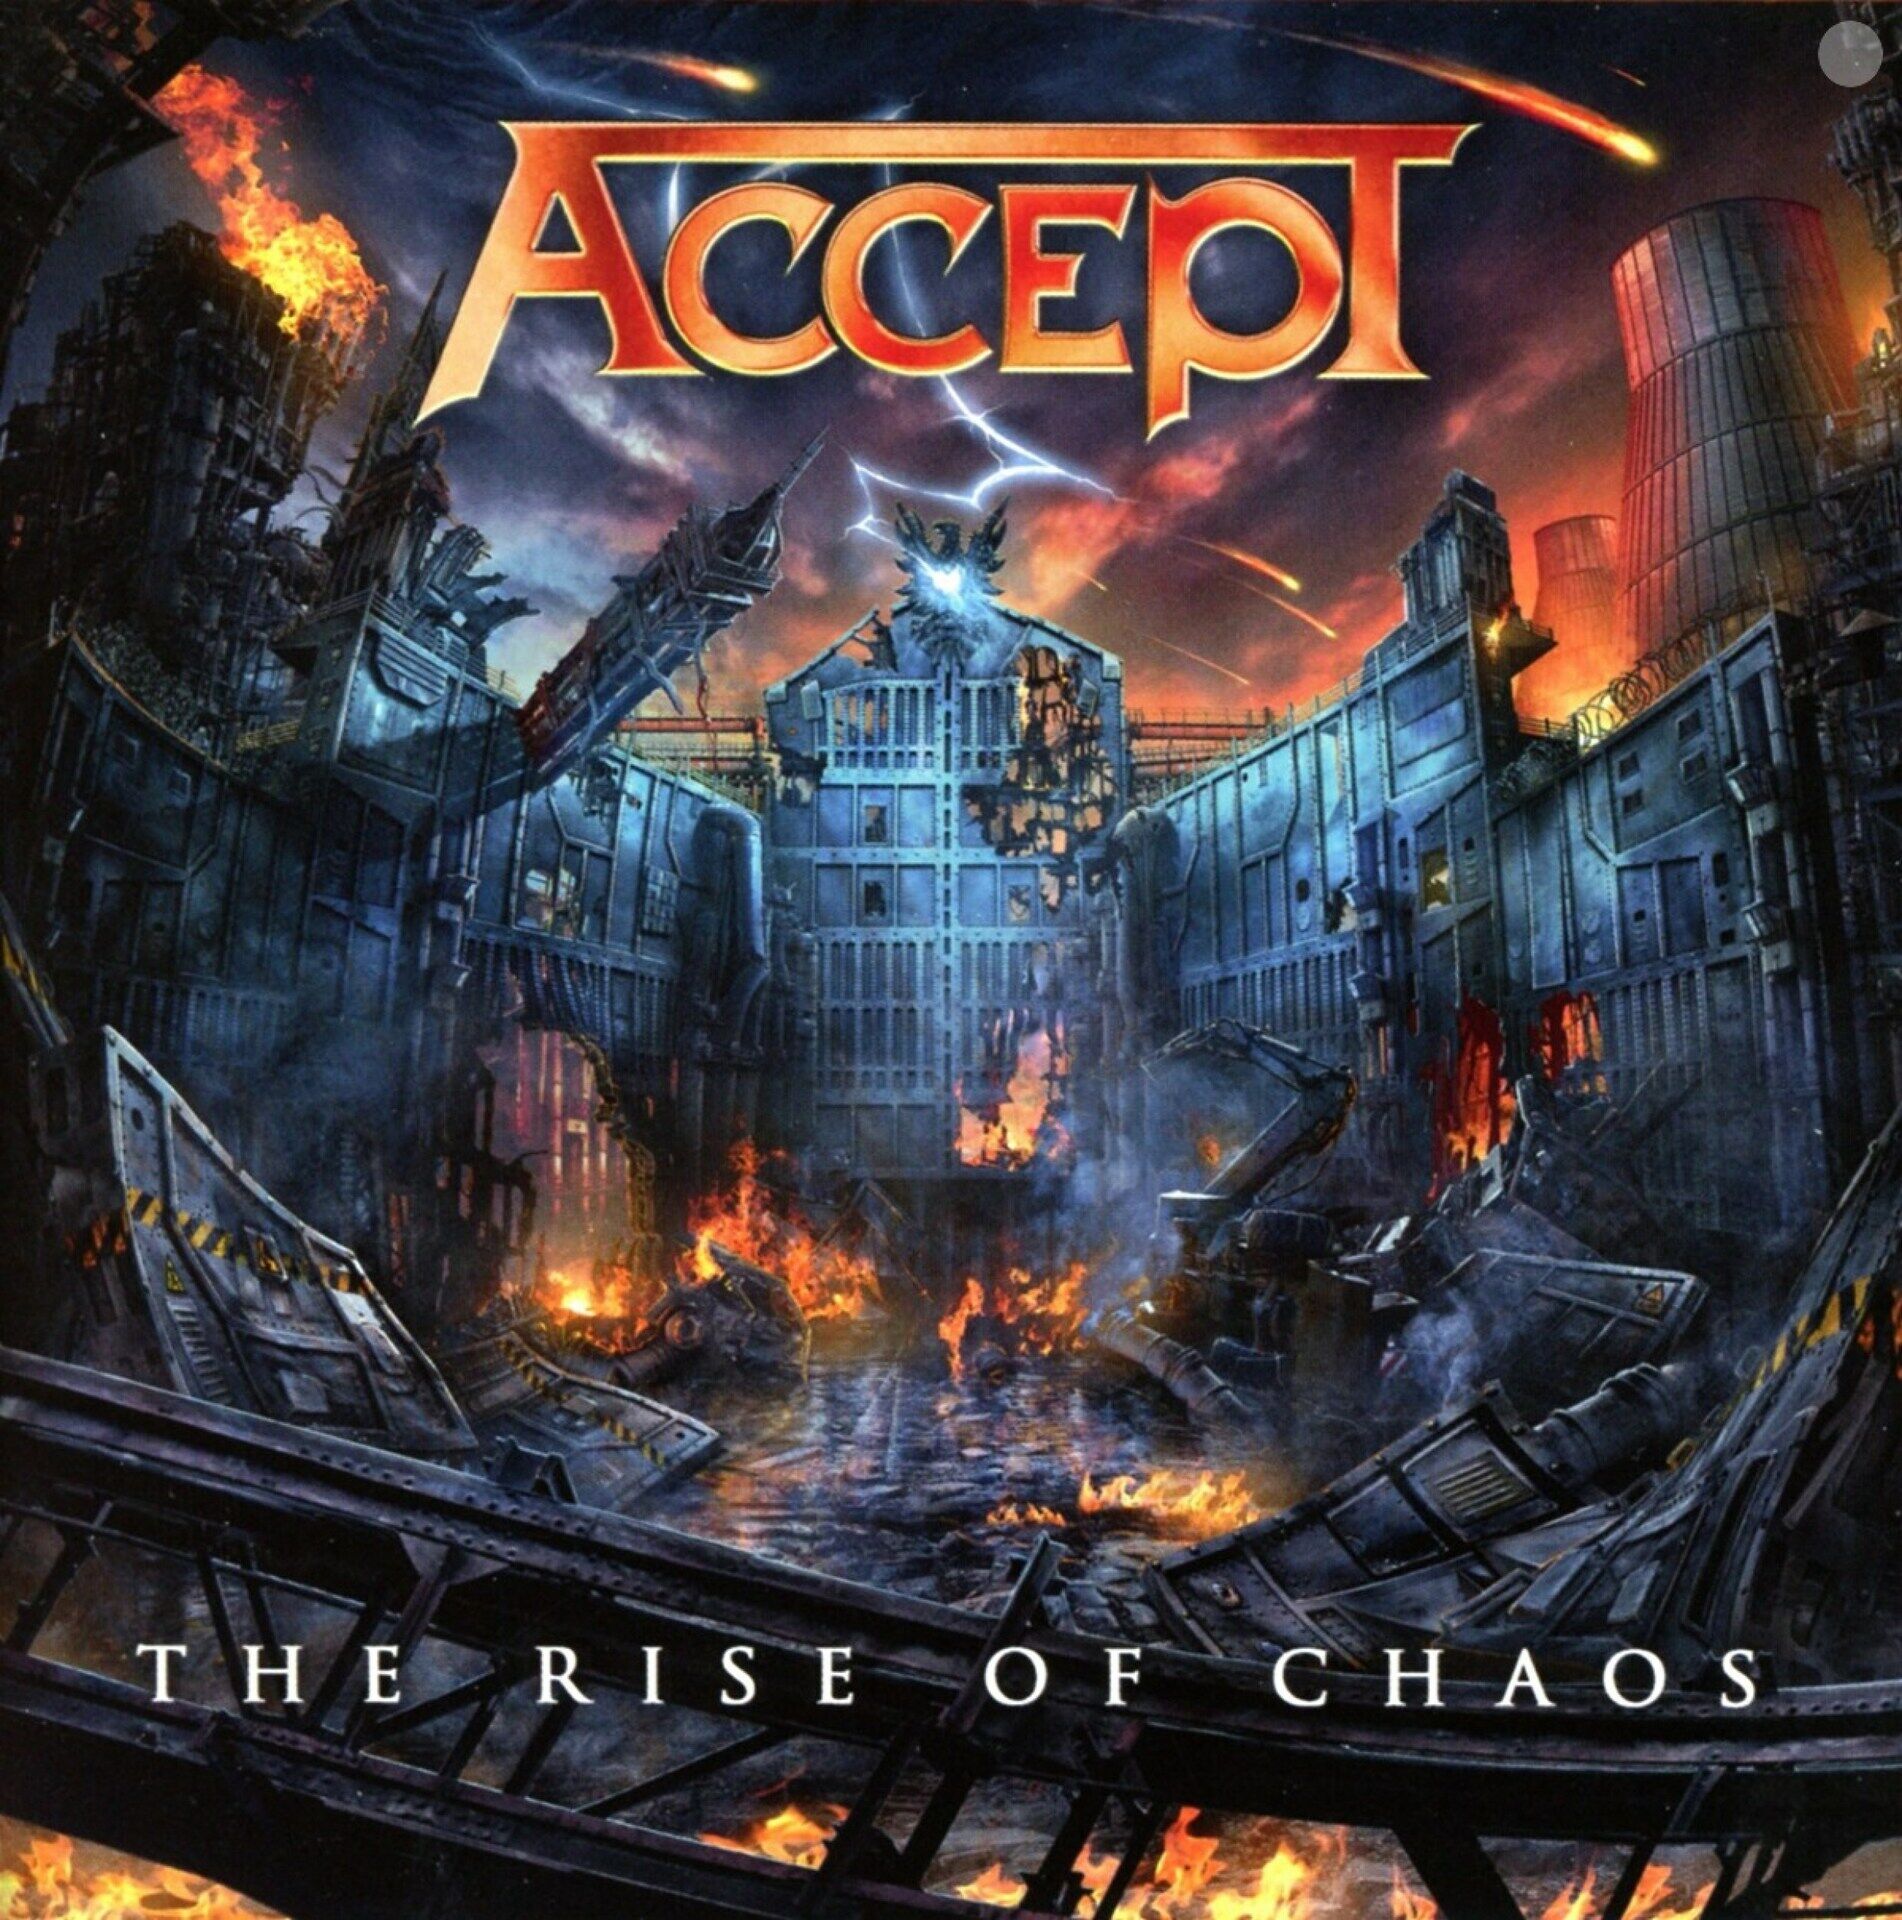 ACCEPT - The rise of chaos [DIGI]